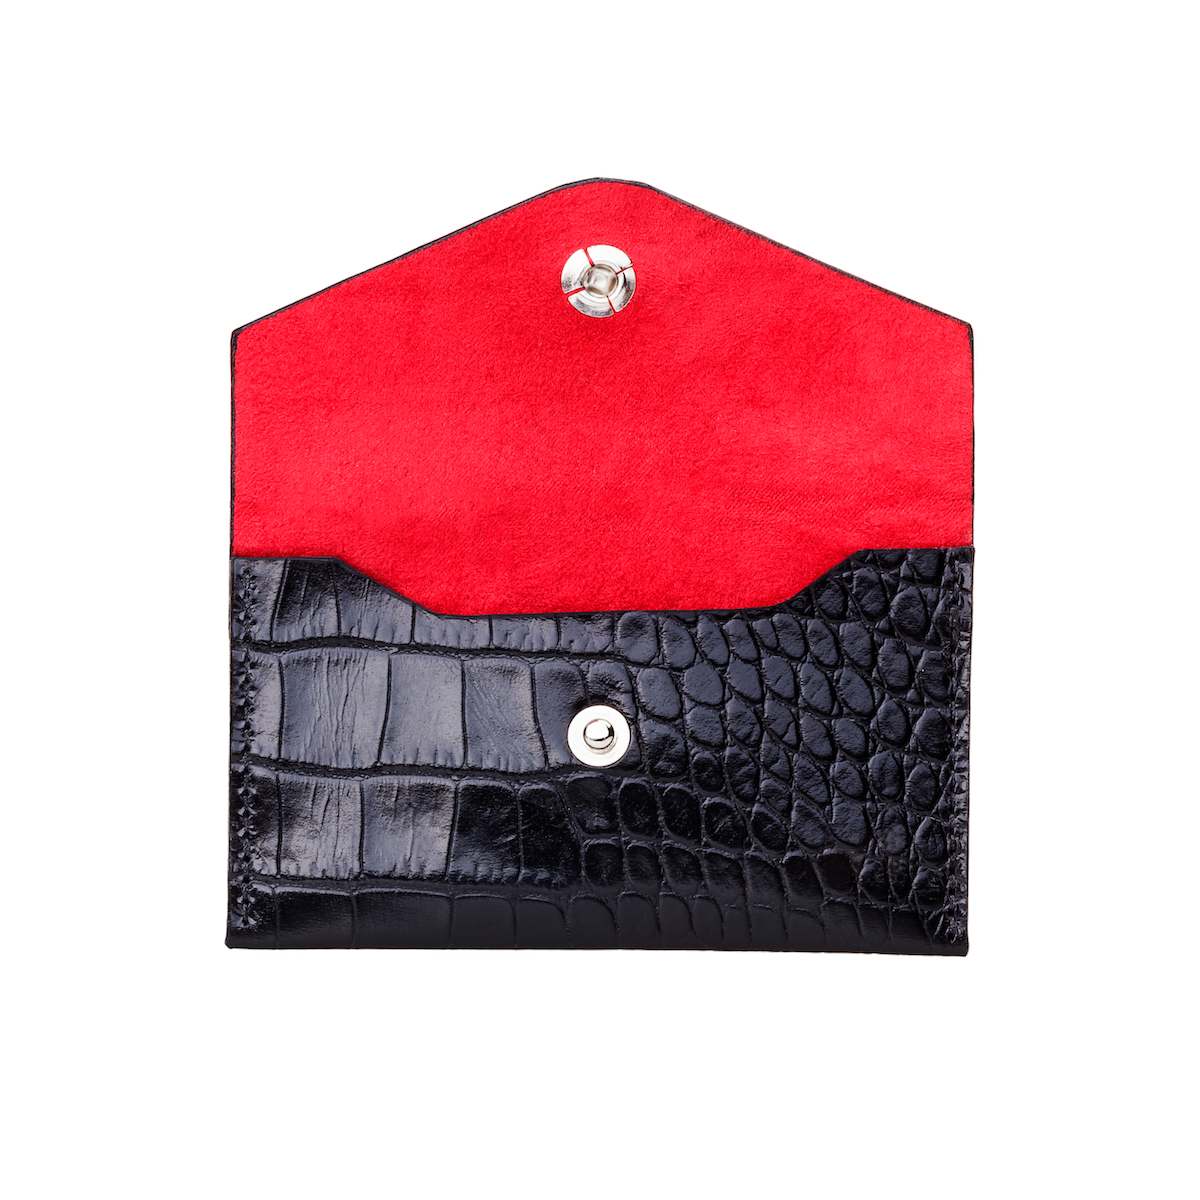 Business Card Holder, Croco Leather Black/Red, MAISON JMK-VONMEL Luxe Gifts